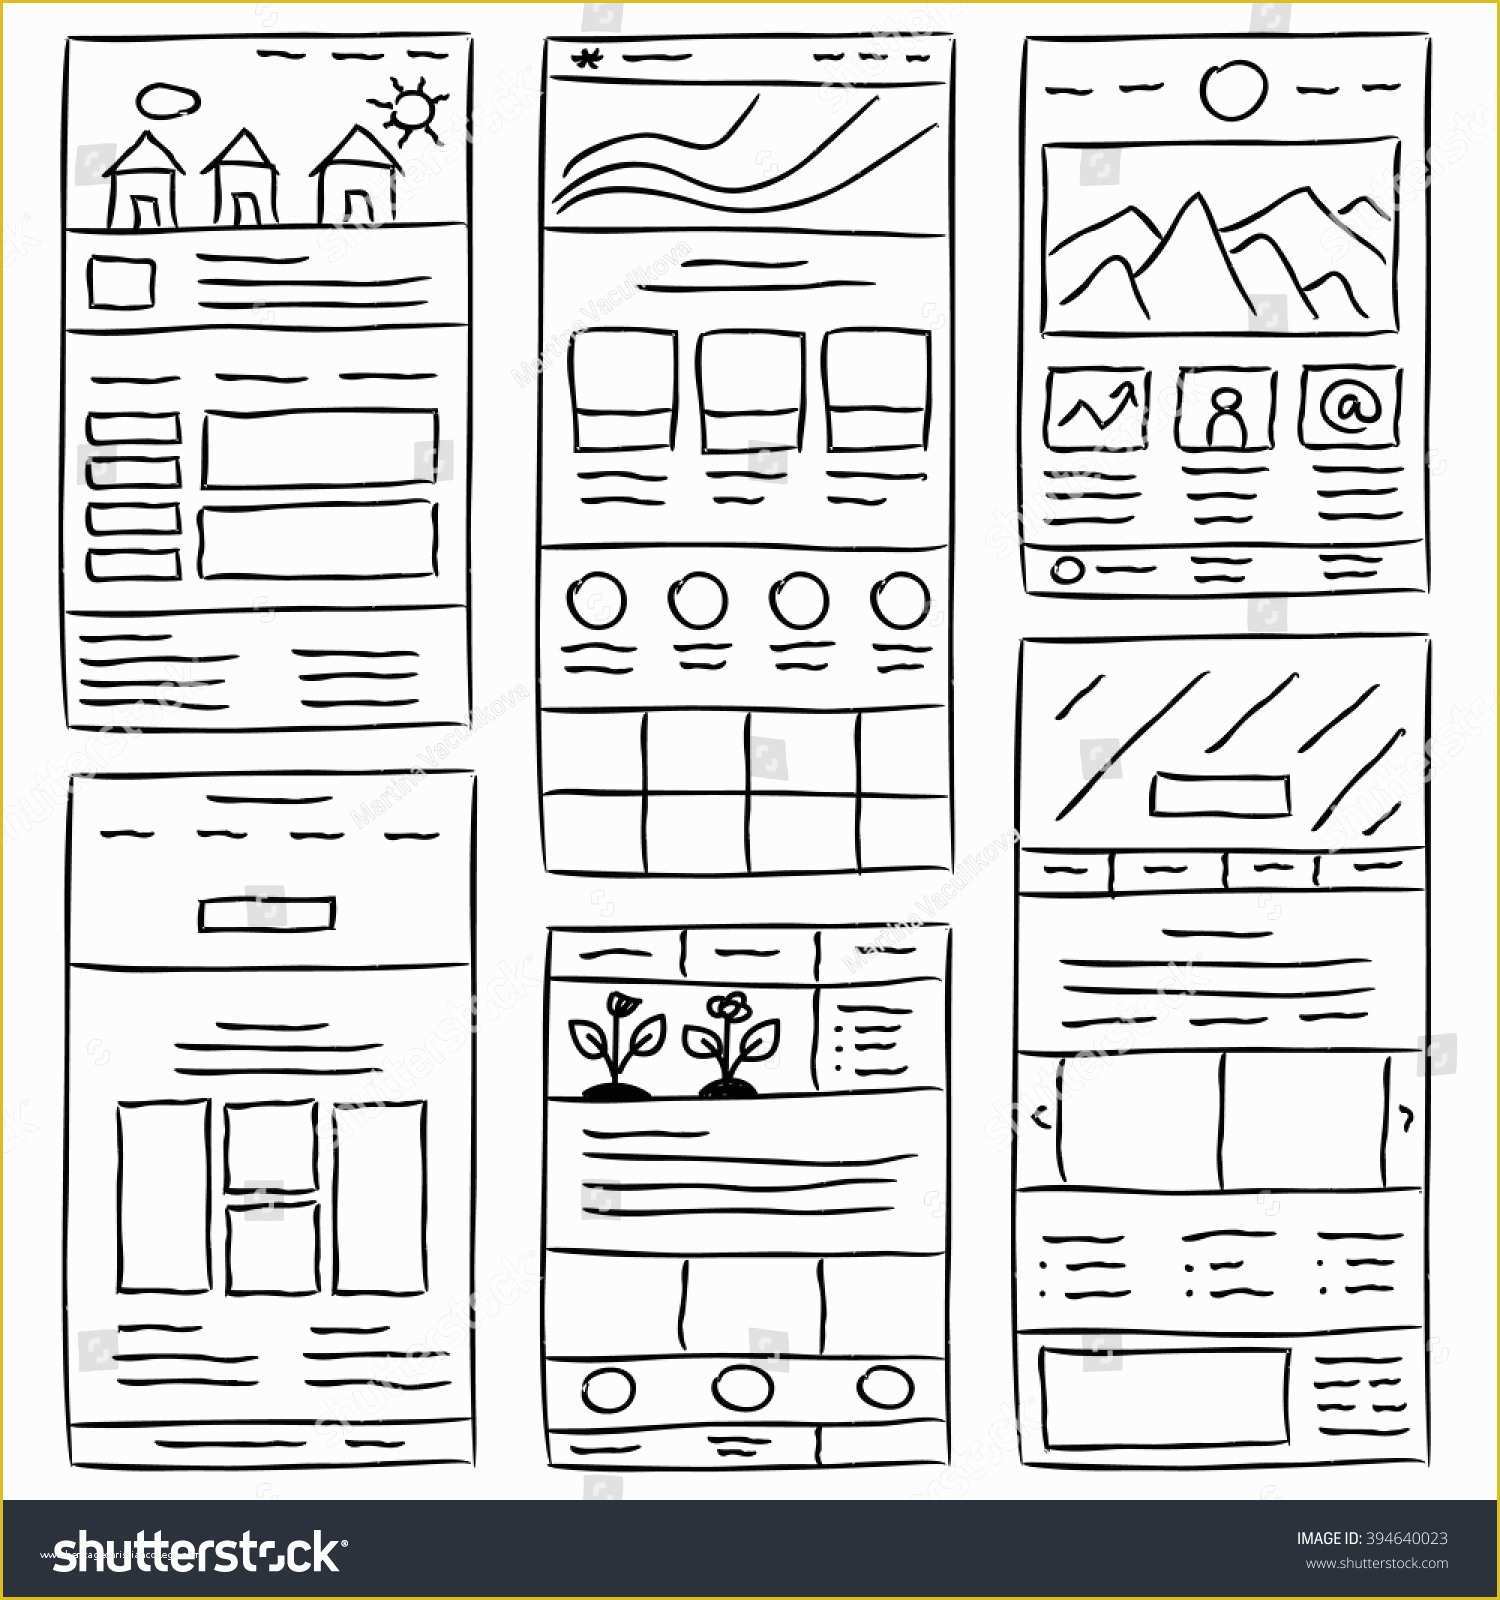 Sketch Website Template Free Of Hand Drawn Website Layouts Doodle Style Stock Vector